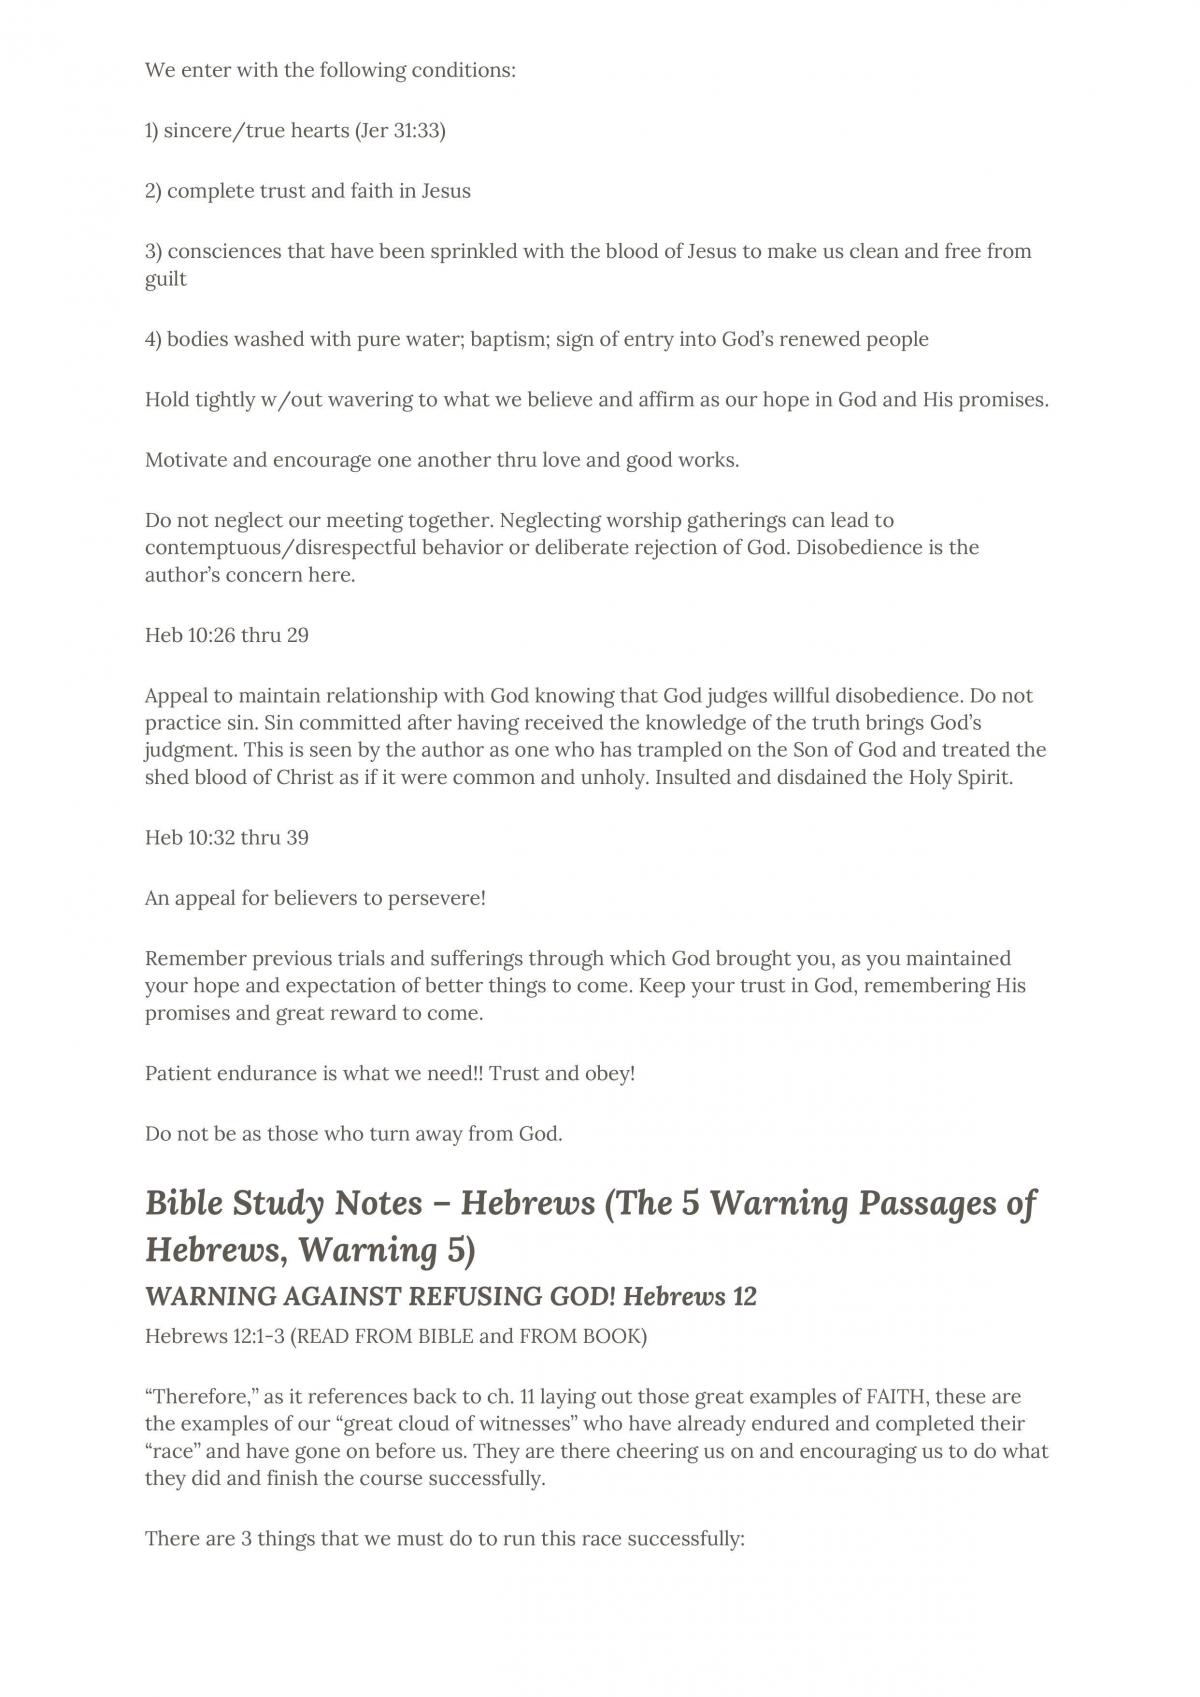 The 5 Warning Passages of Hebrews - Page 9